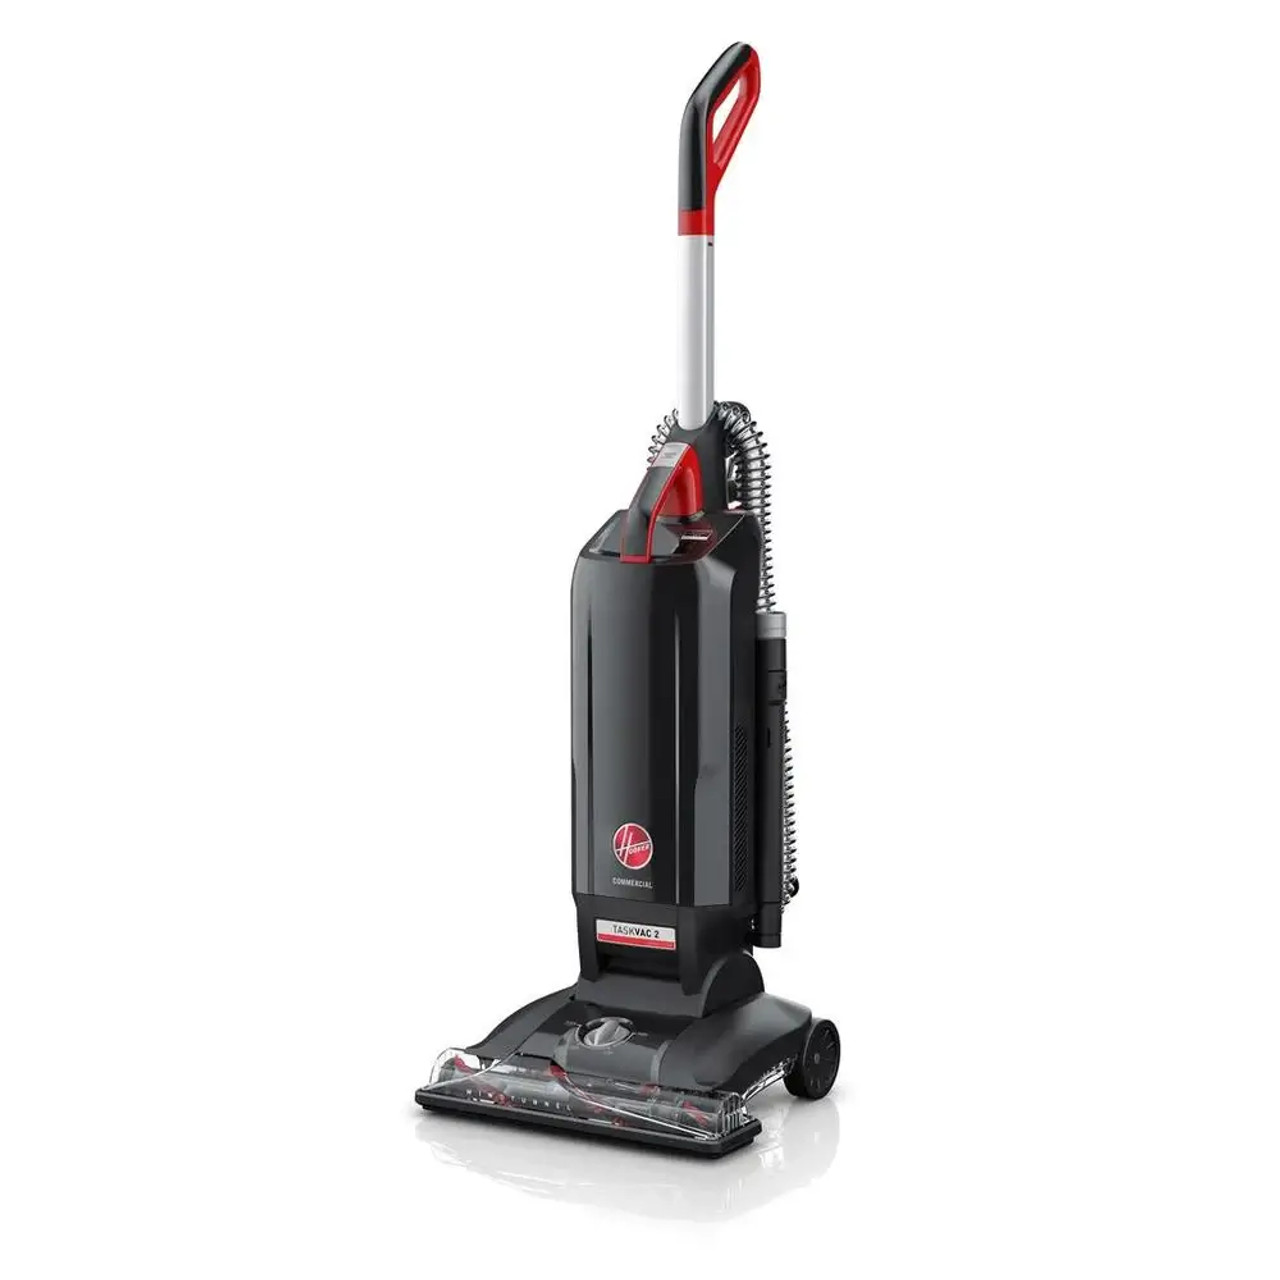 hoover Hoover 14" Task Vac 2 Commercial Bagged Upright Vacuum Cleaner with HEPA Filtration - Professional Cleaning with Advanced Filtration